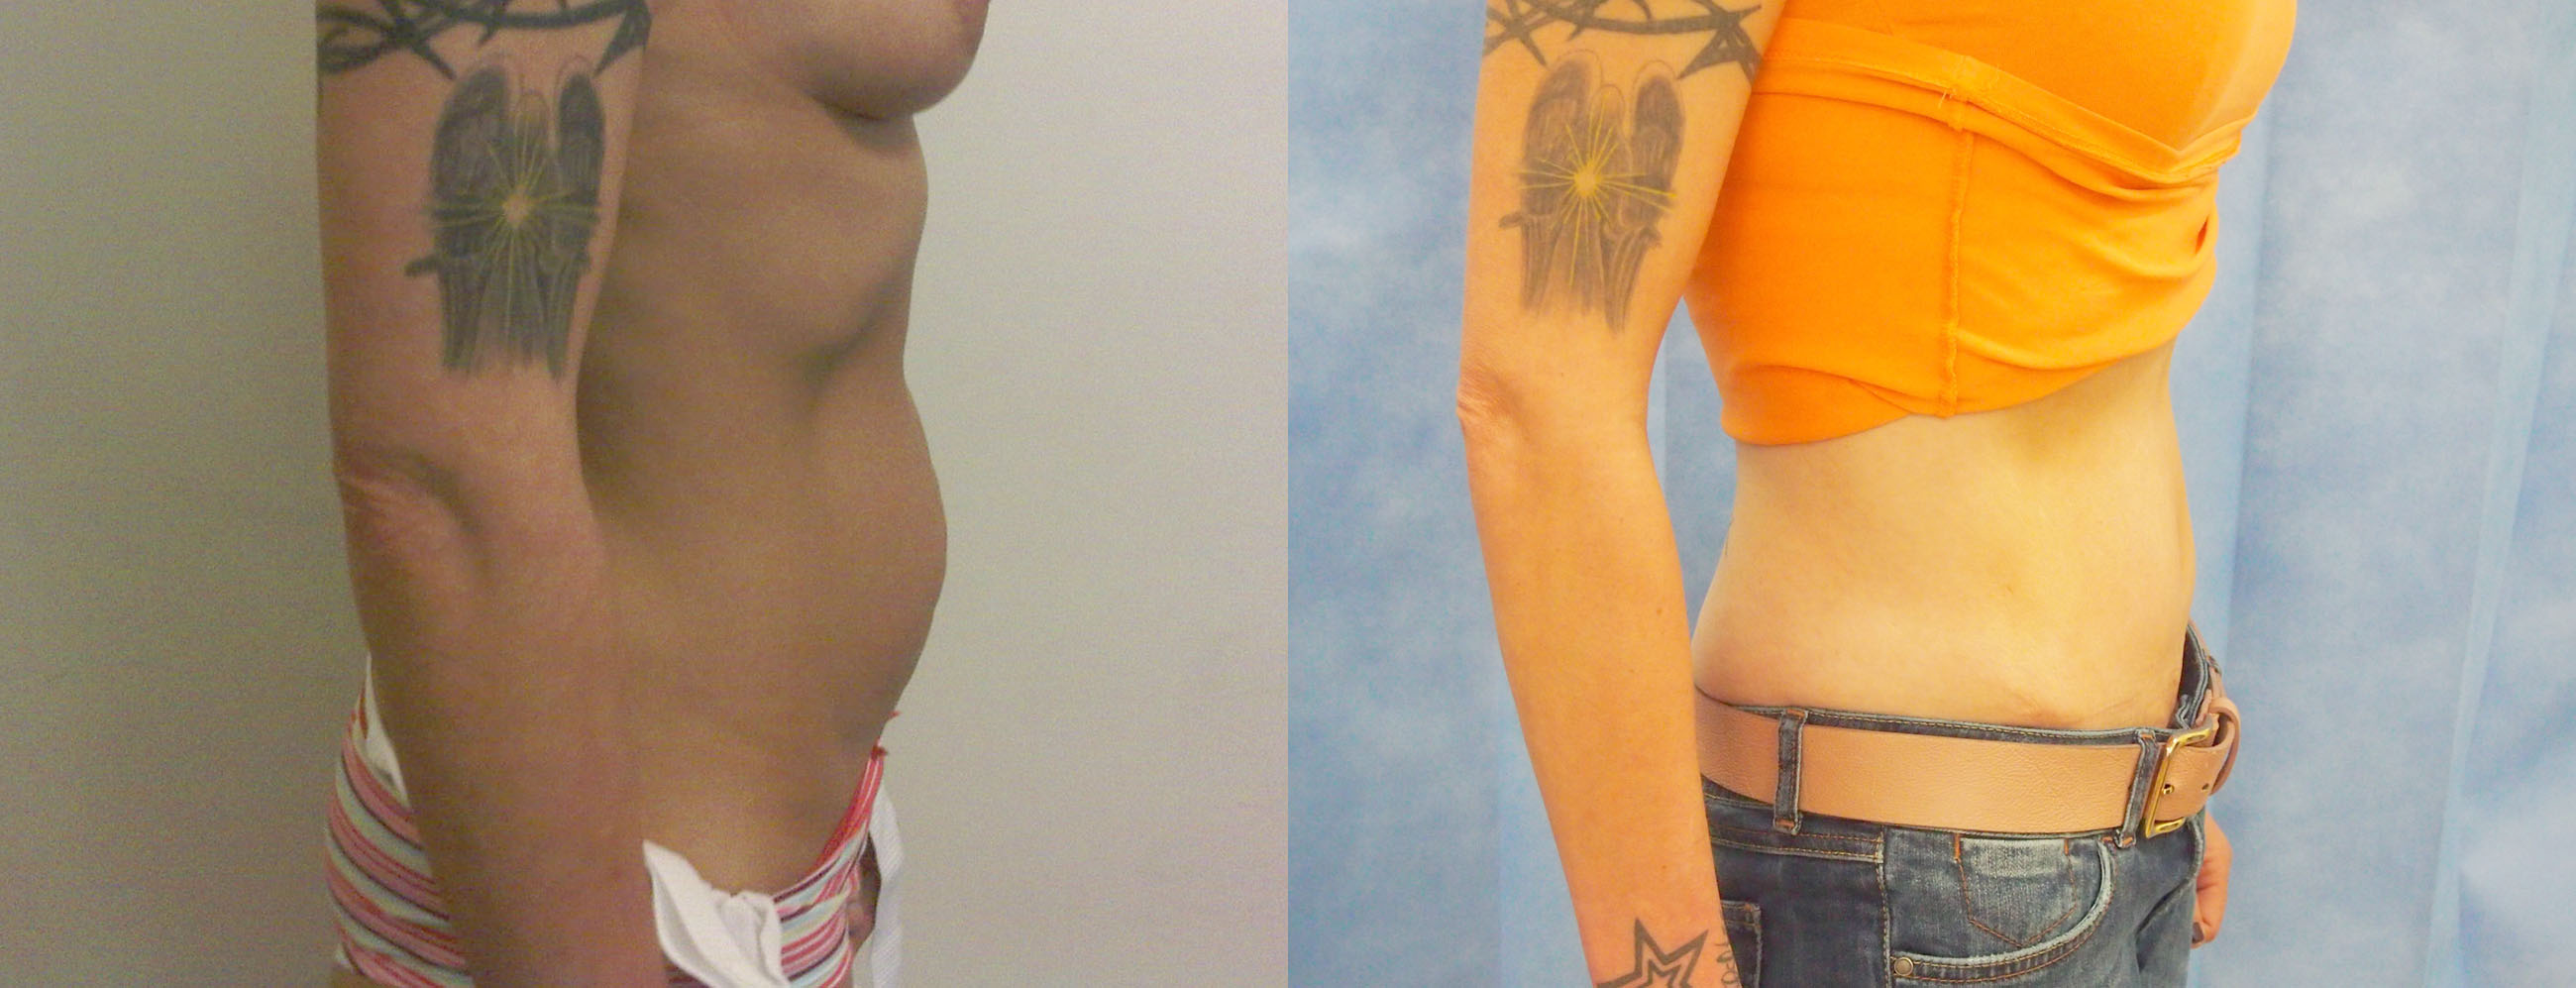 Abdominoplasty (Tummy Tuck) Before and Afters